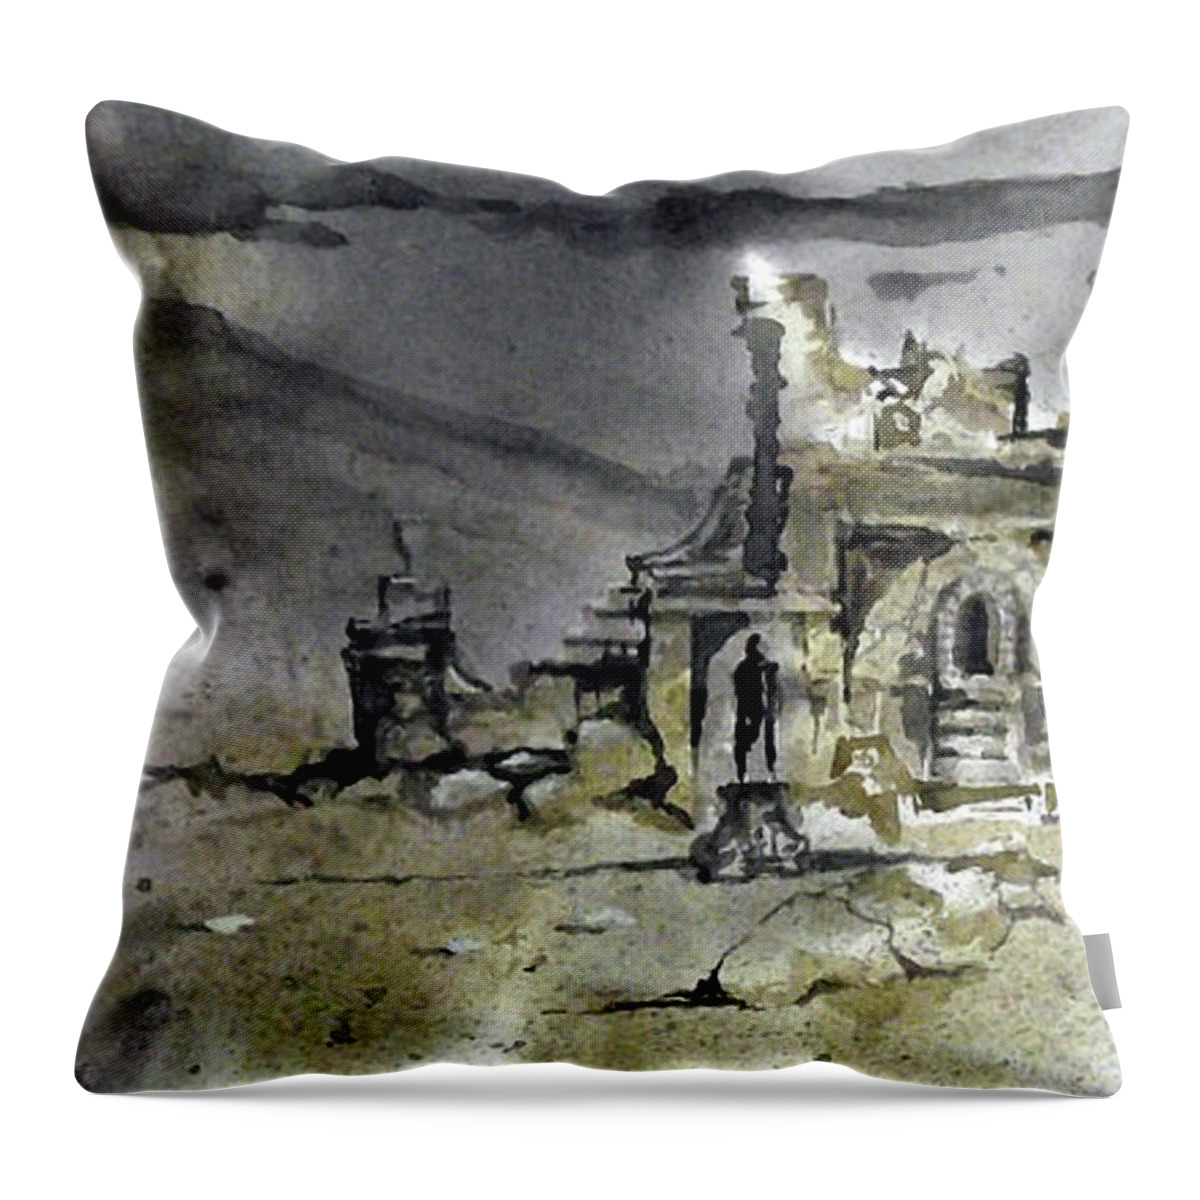  Throw Pillow featuring the painting On the Road II by Douglas Teller